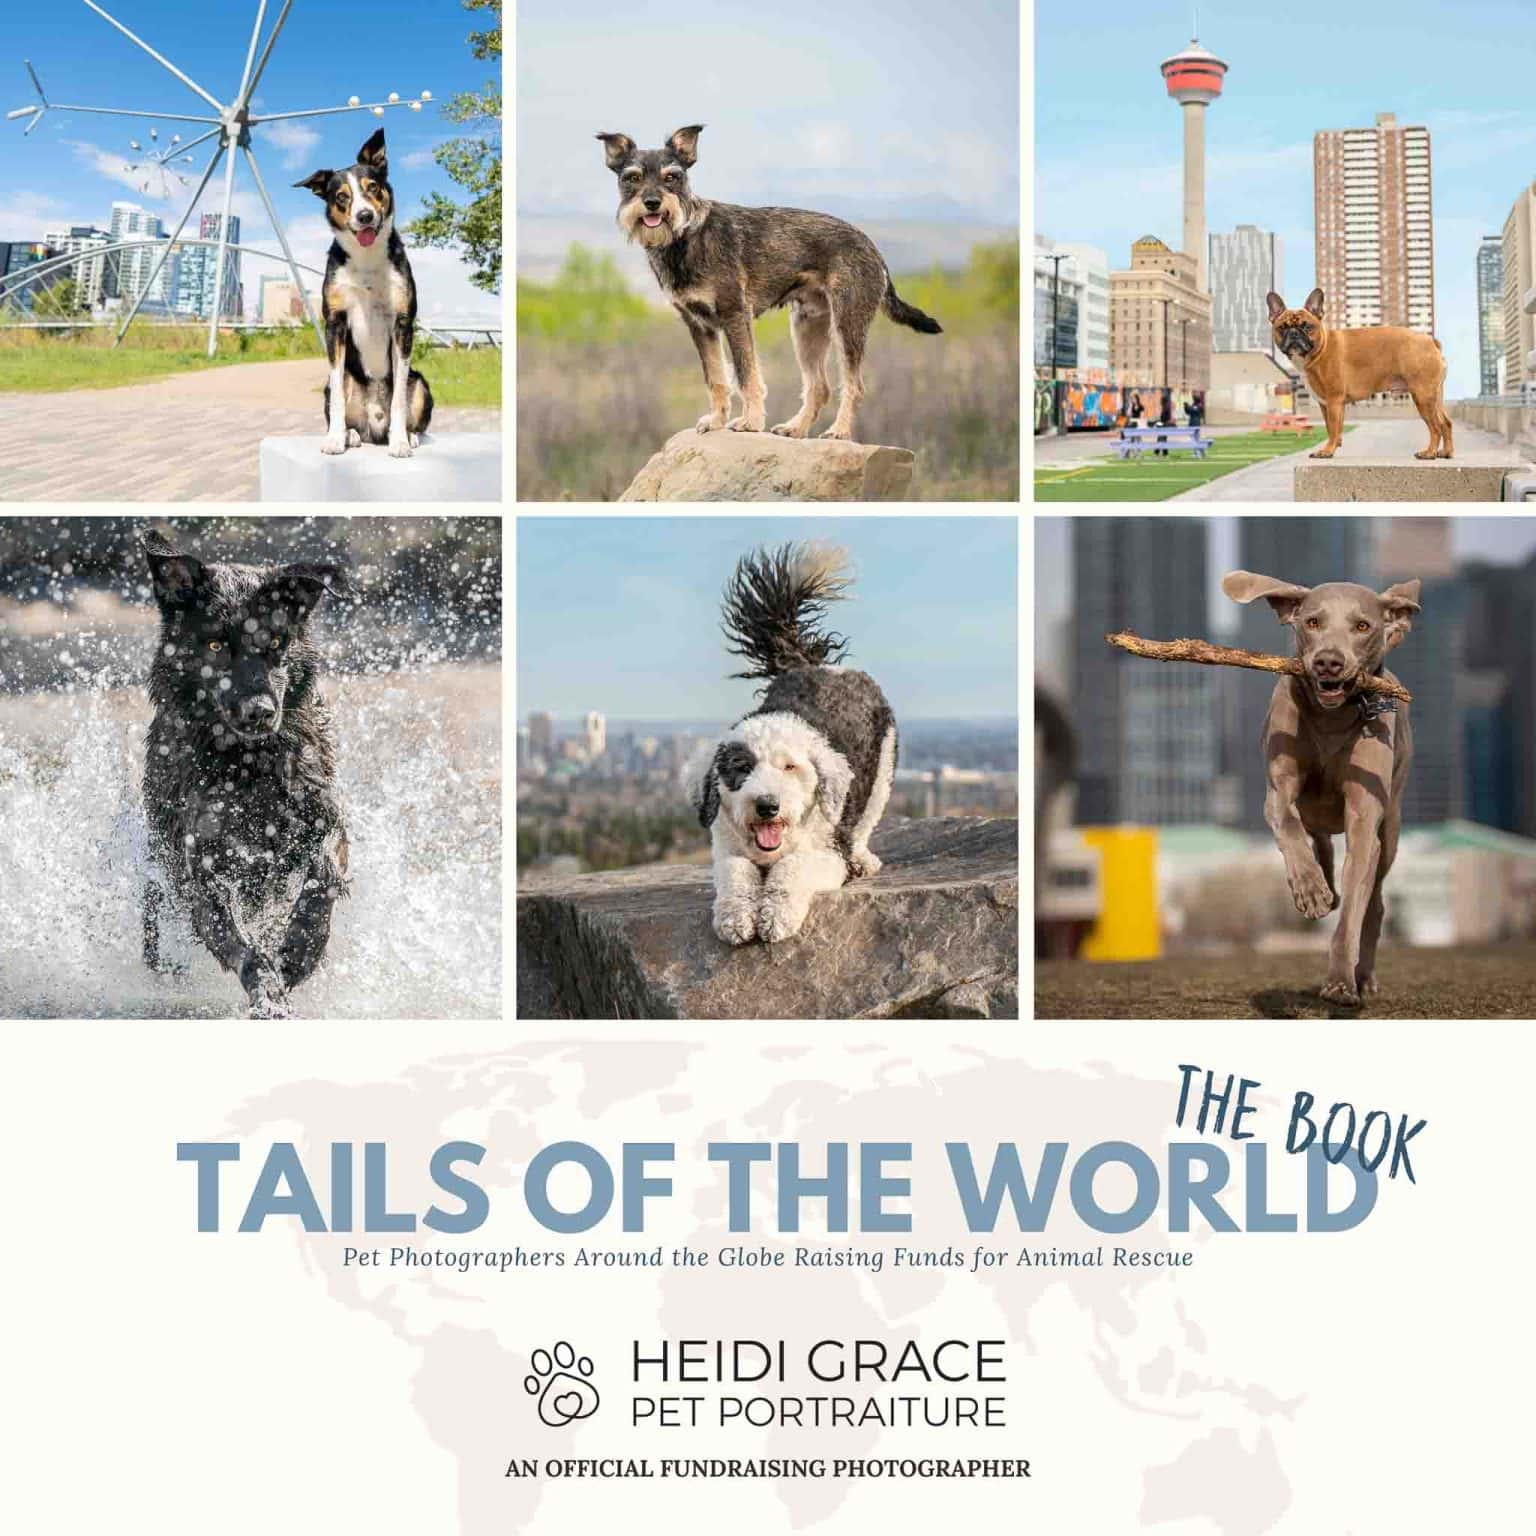 Images from the Tails of the World book by Heidi Grace